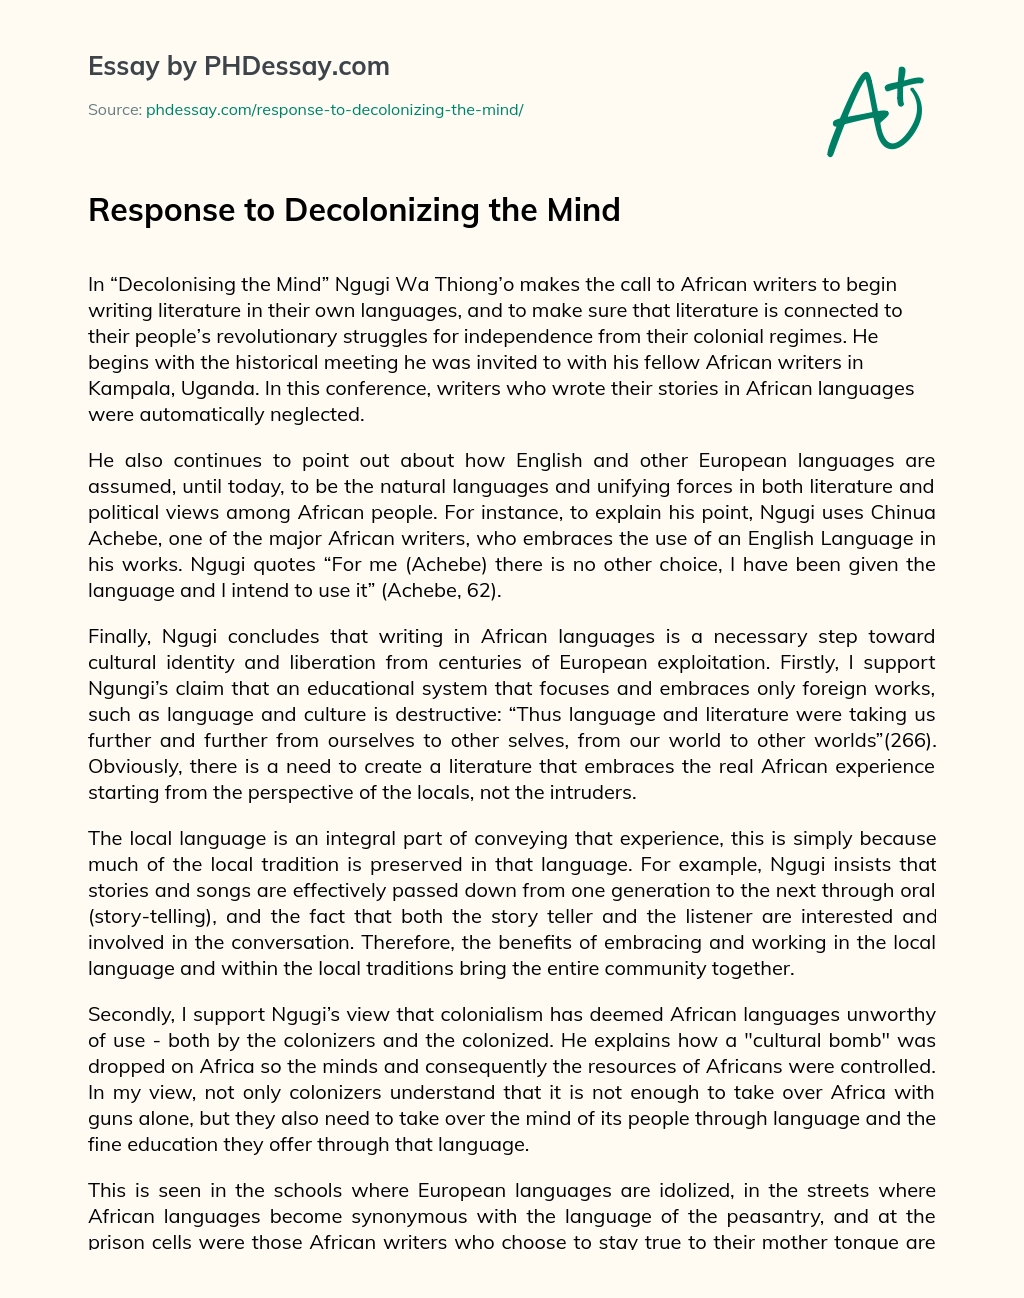 Response to Decolonizing the Mind essay